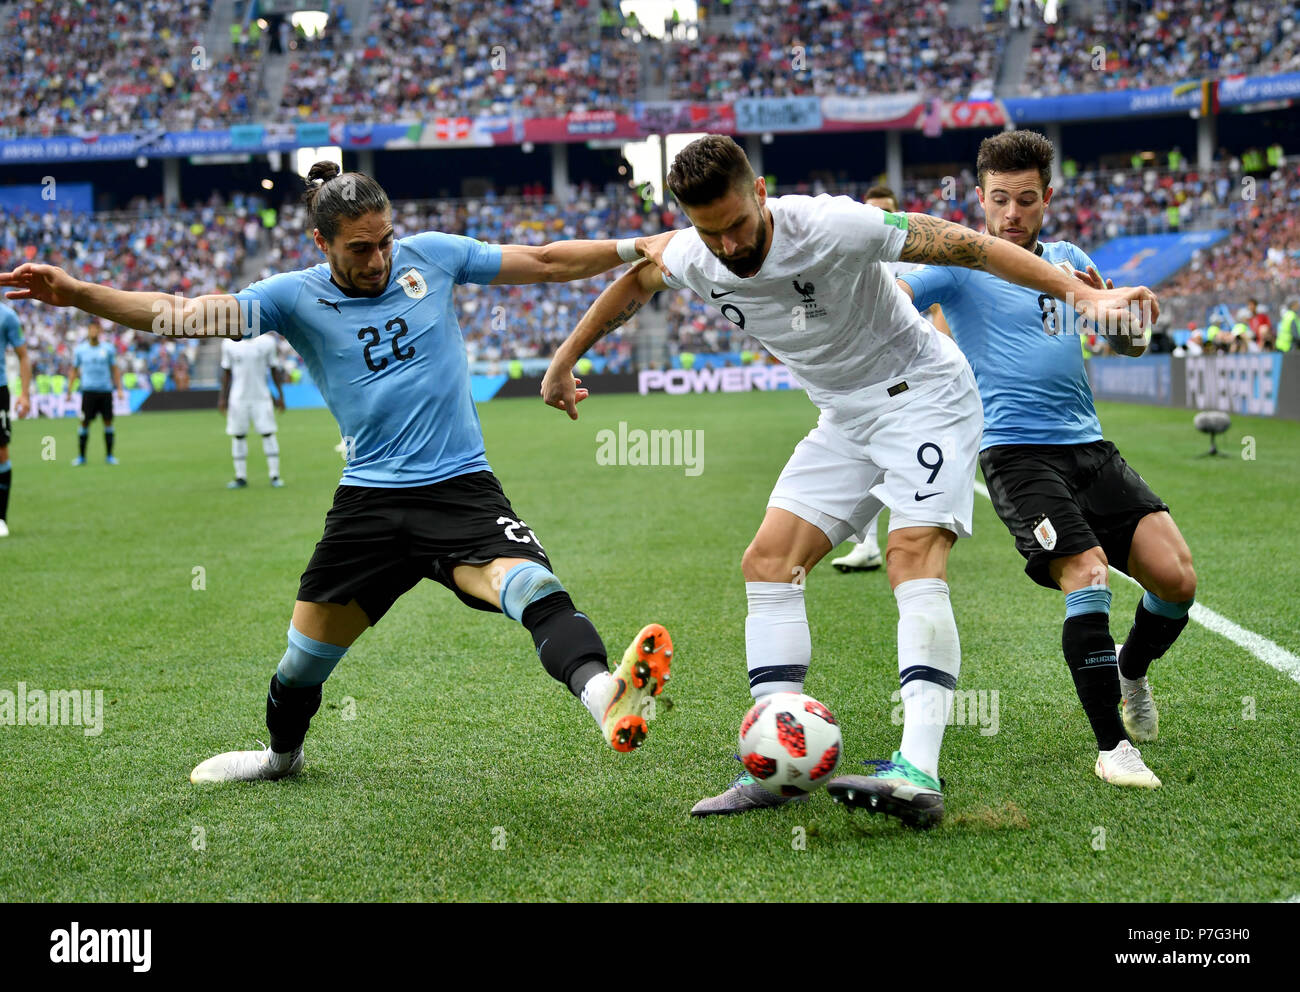 Nizhny Novgorod, Russia. 6th July, 2018. Martin Caceres (L) of Uruguay vies with Olivier Giroud (C) of France during the 2018 FIFA World Cup quarter-final match between Uruguay and France in Nizhny Novgorod, Russia, July 6, 2018. Credit: Chen Cheng/Xinhua/Alamy Live News Stock Photo